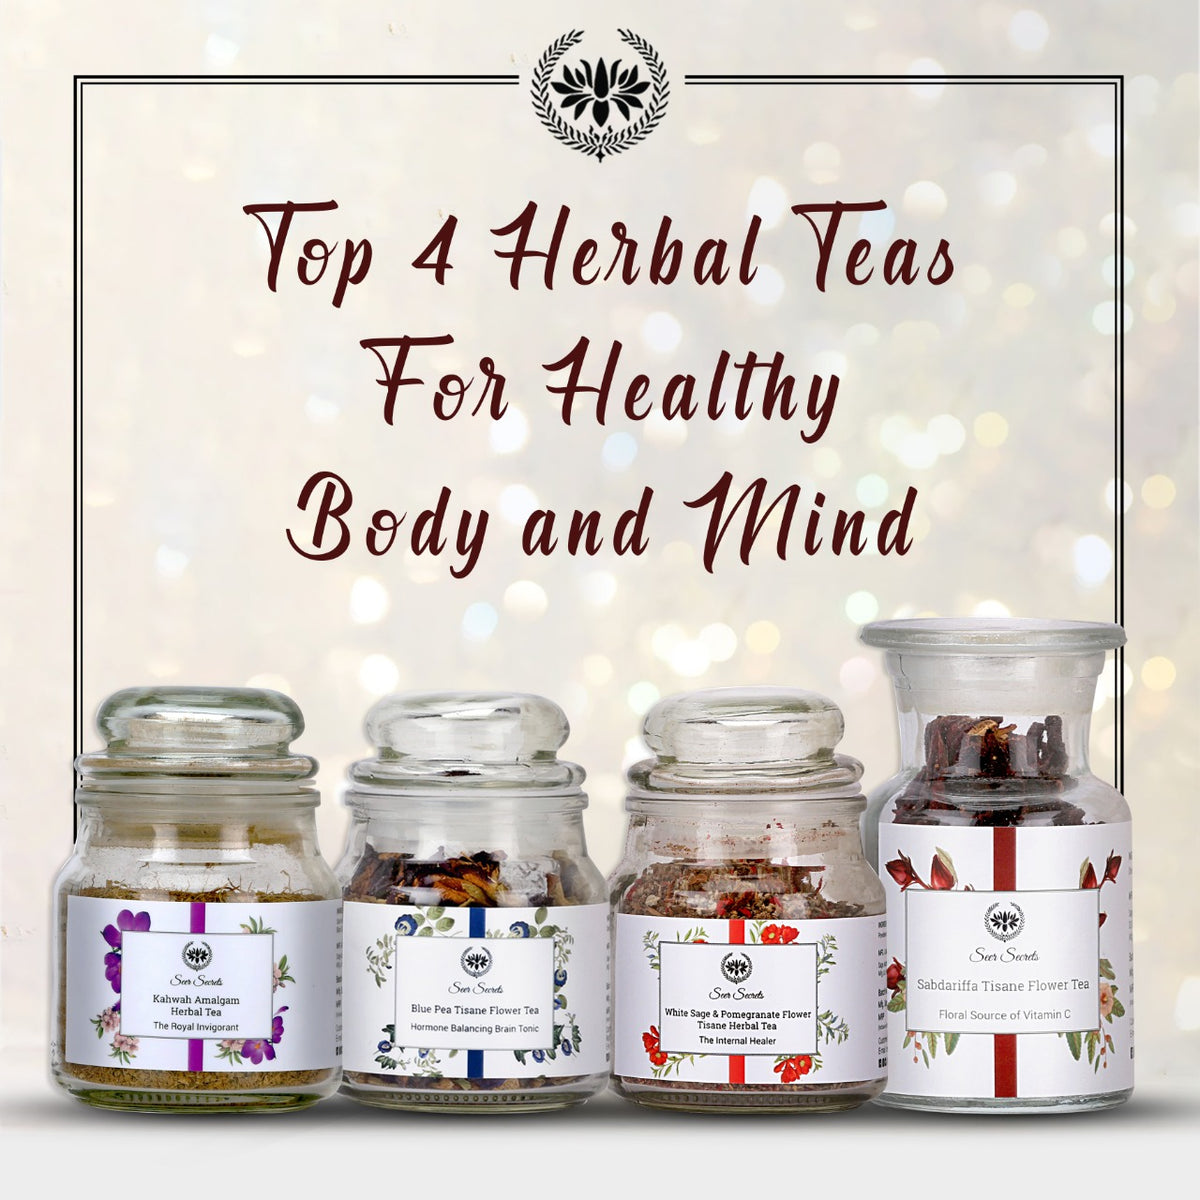 Top 4 Herbal Teas for Healthy Body and Mind